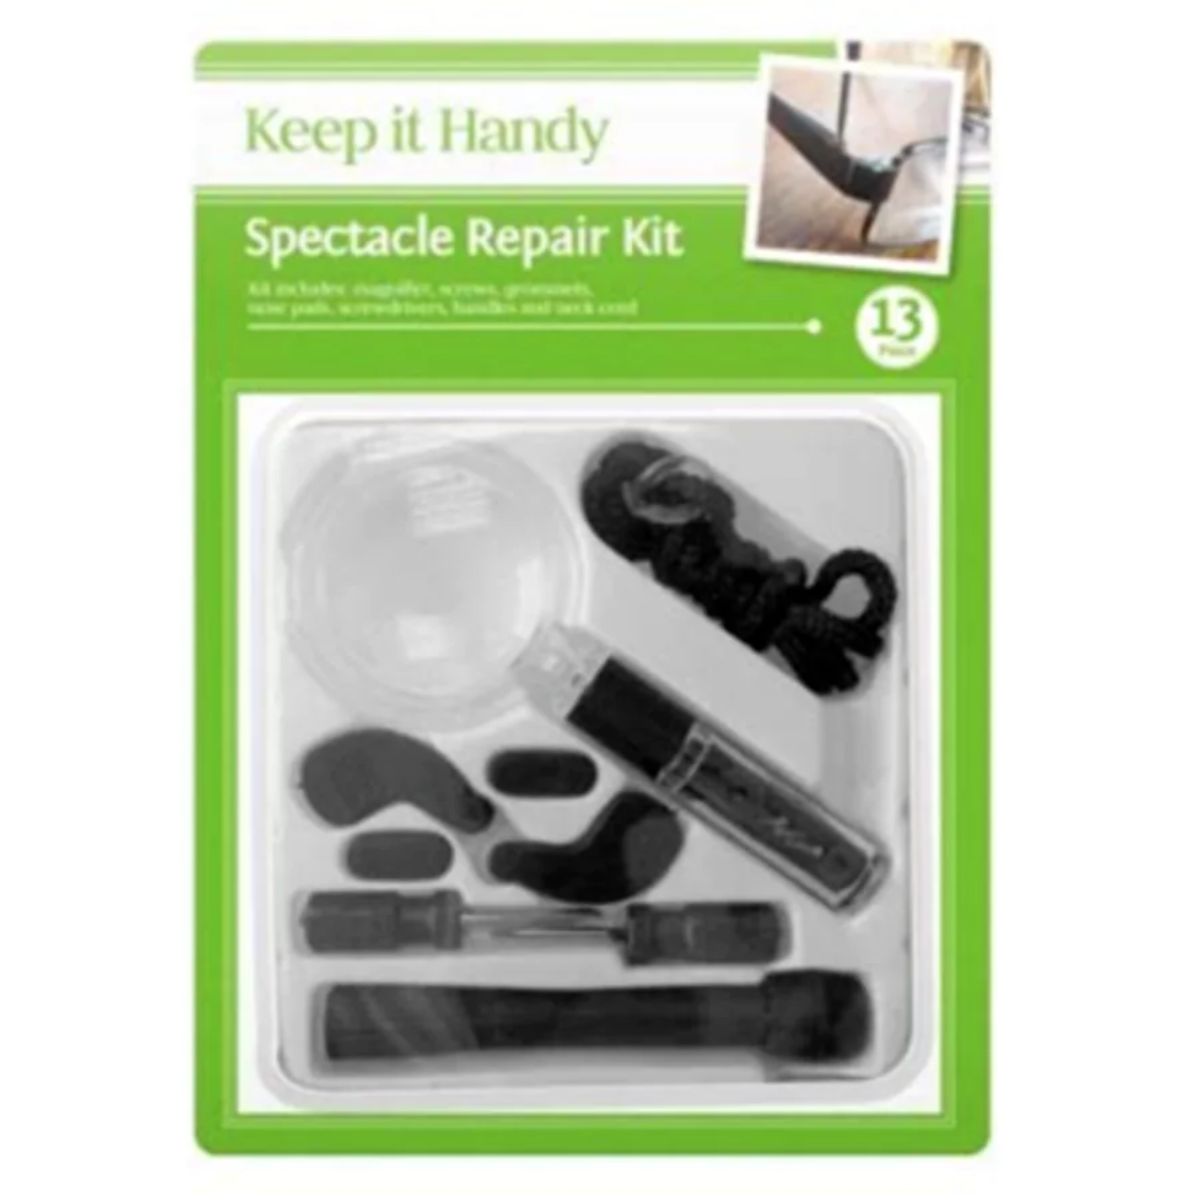 A Spectacle - Eyeglass Repair Maintenance Kit 13 Piece with various tools and accessories for fixing glasses, packaged in a green and clear plastic case.